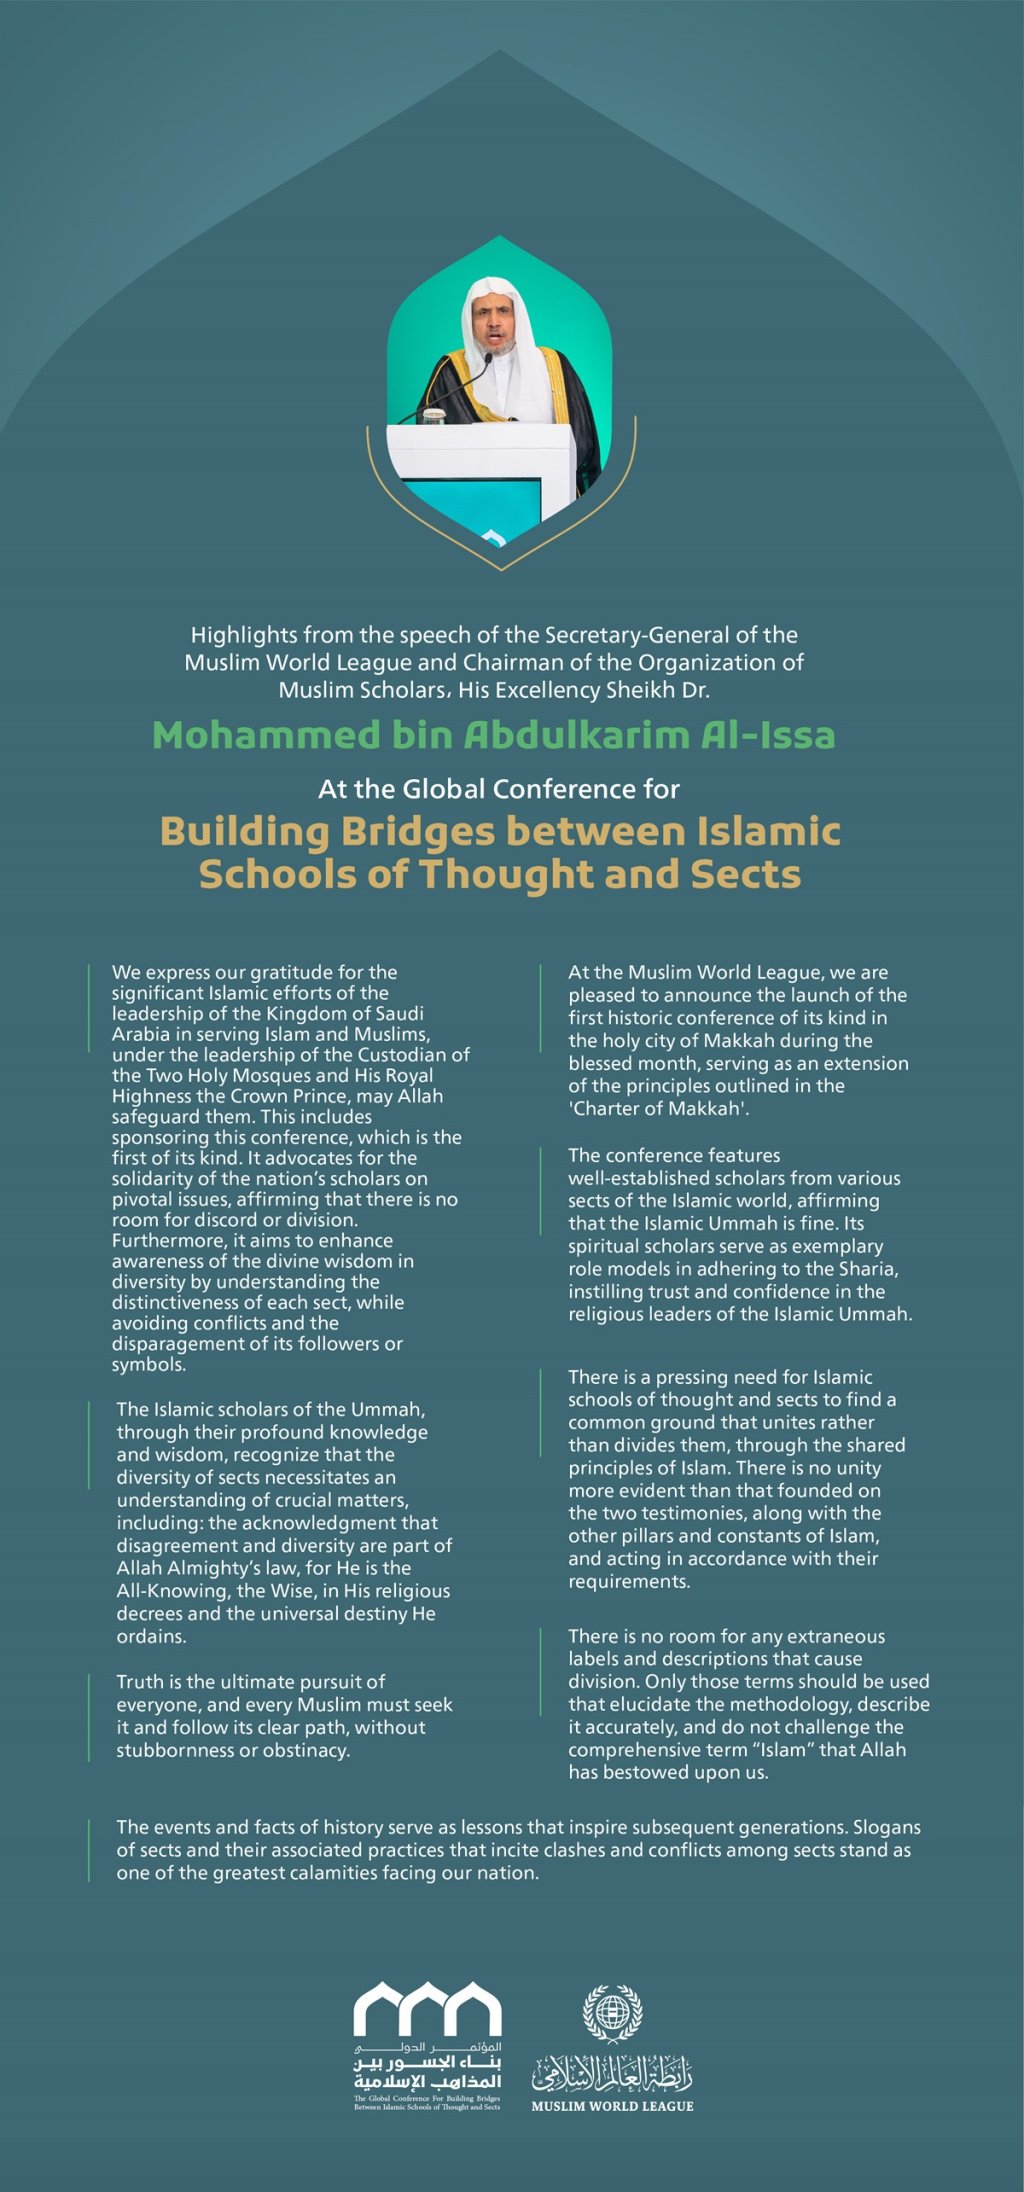 Highlights from the speech of His Excellency Sheikh Dr. Mohammed Al-Issa, Secretary-General of the MWL and Chairman of the Organization of Muslim Scholars, at the Global Conference for Building Bridges between Islamic Schools of Thought and Sects